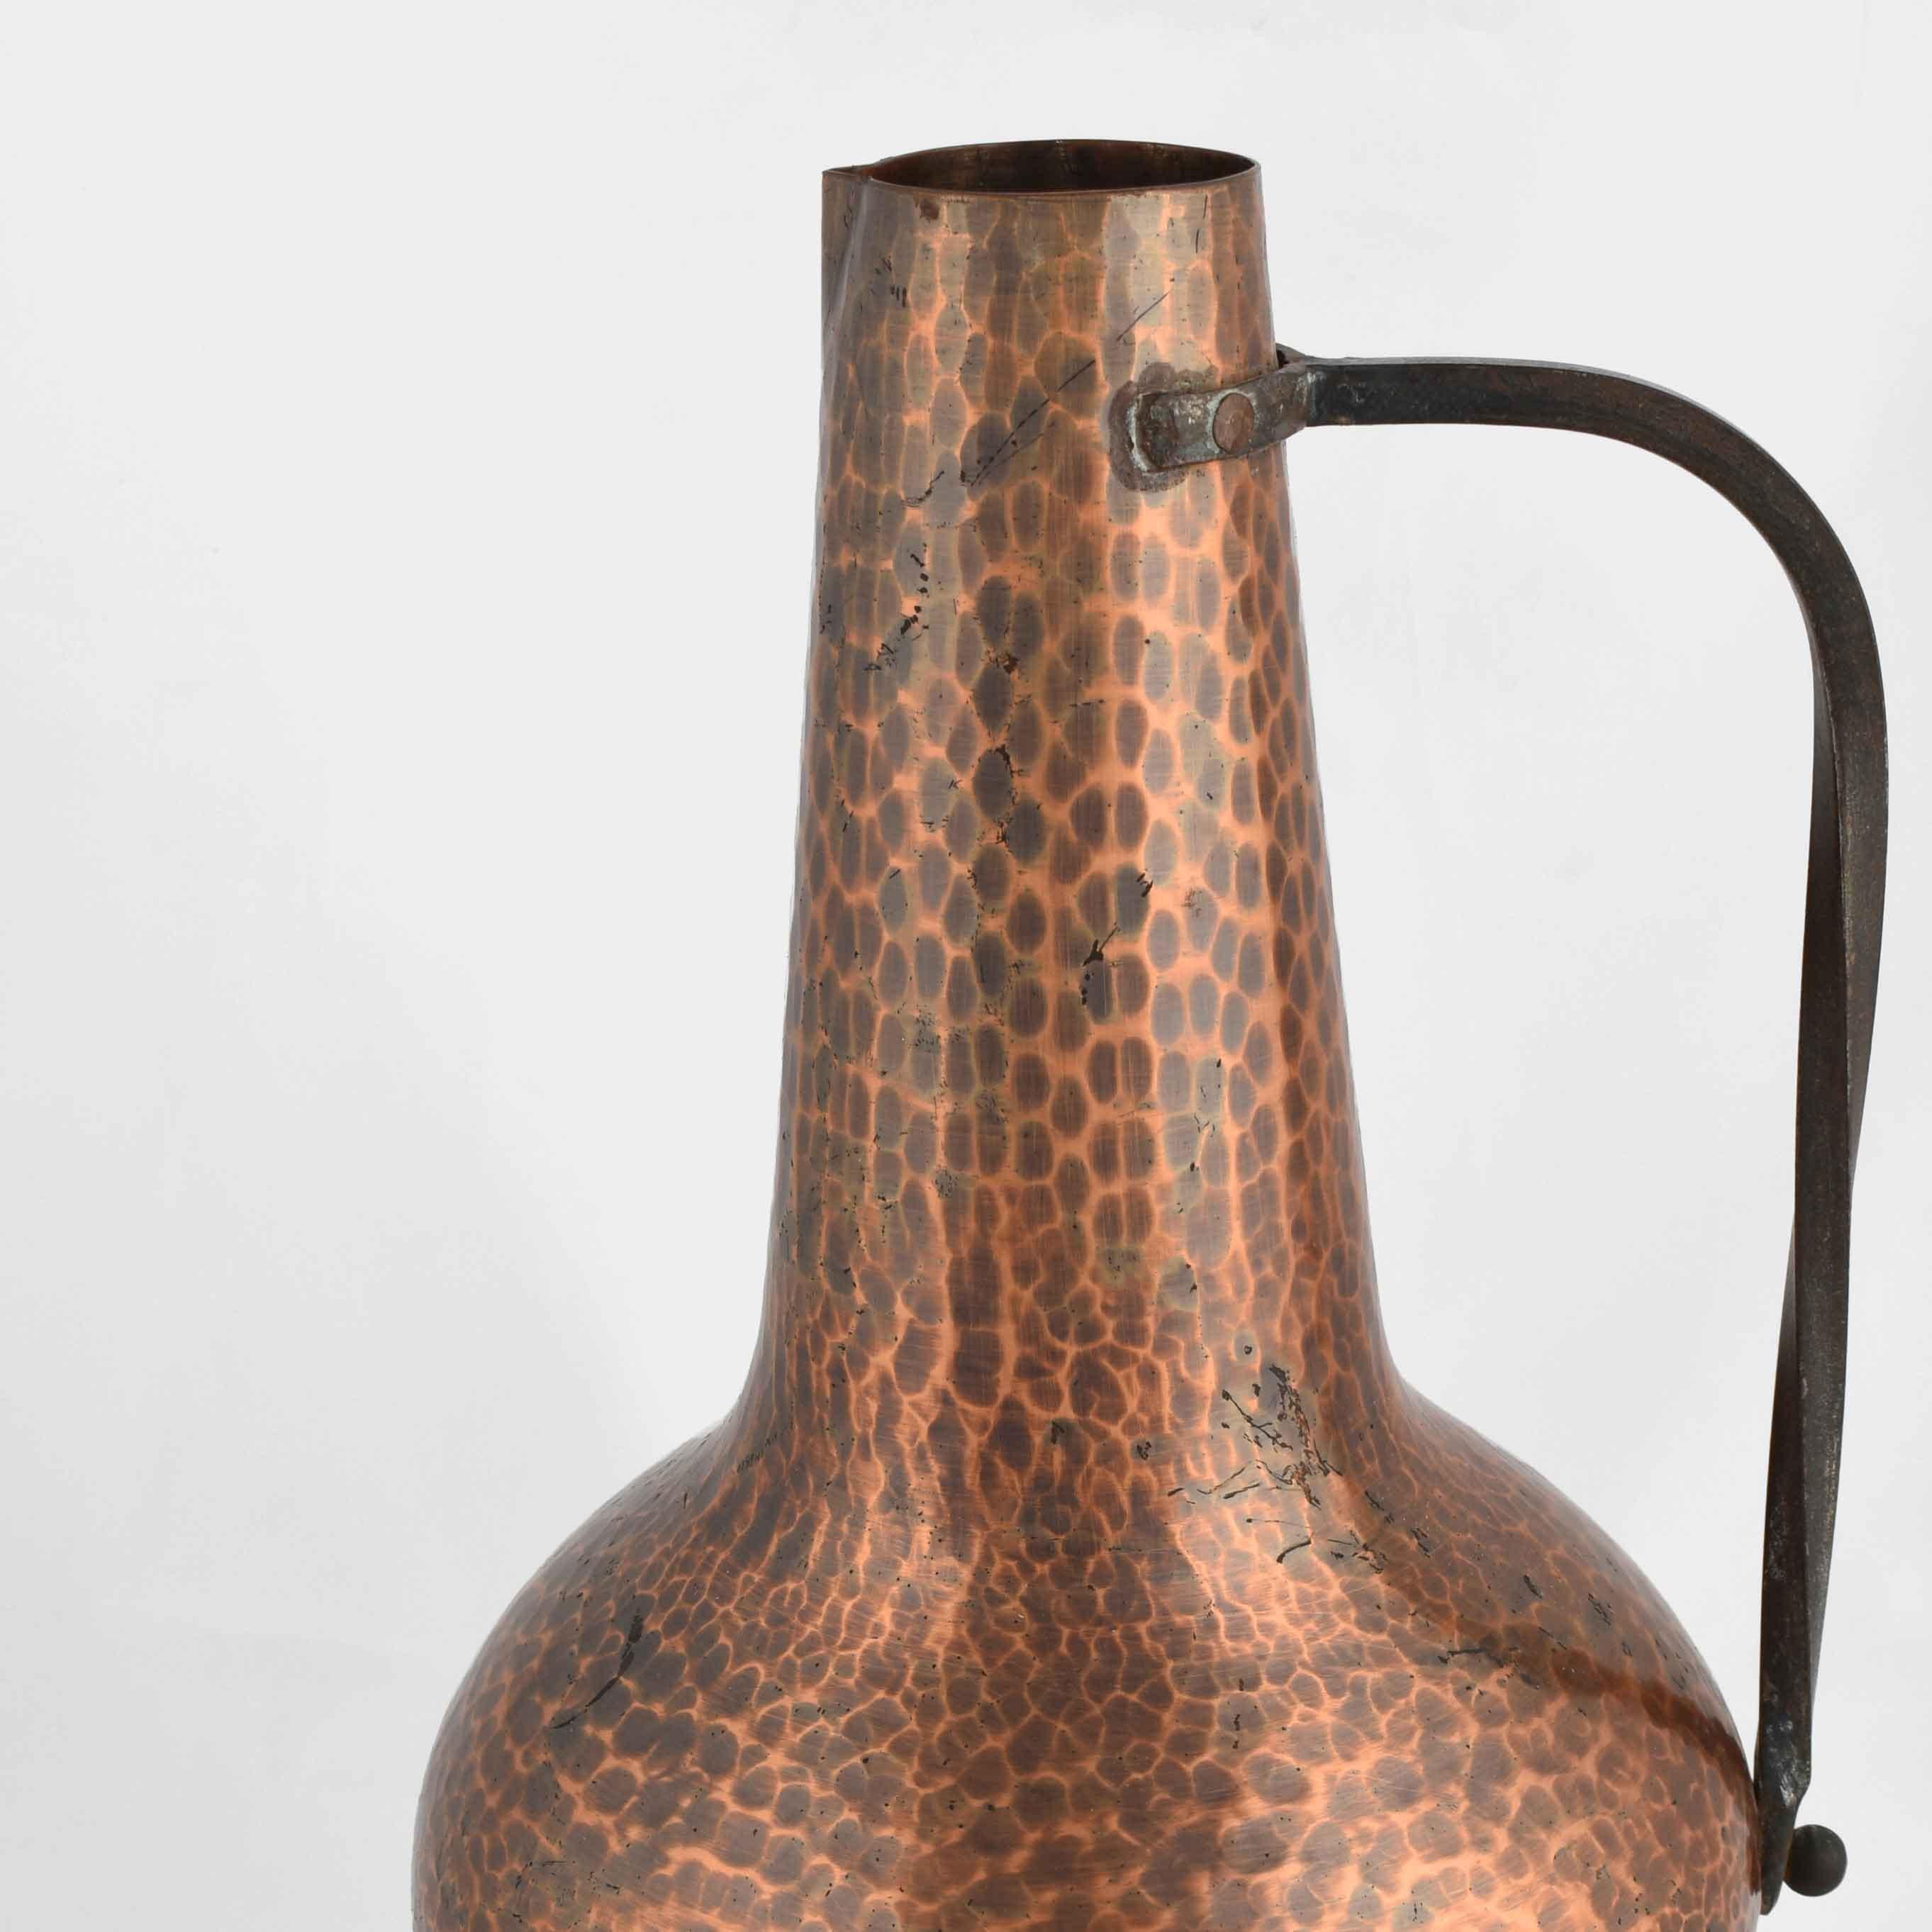 Copper Pitcher with Handle is an original decorative object realized in Germany between the 1950s and the 1960s. 

Original copper object.

Good conditions, normal signs of aging are present.

Fine German vintage Copper by Wall Metalwork with